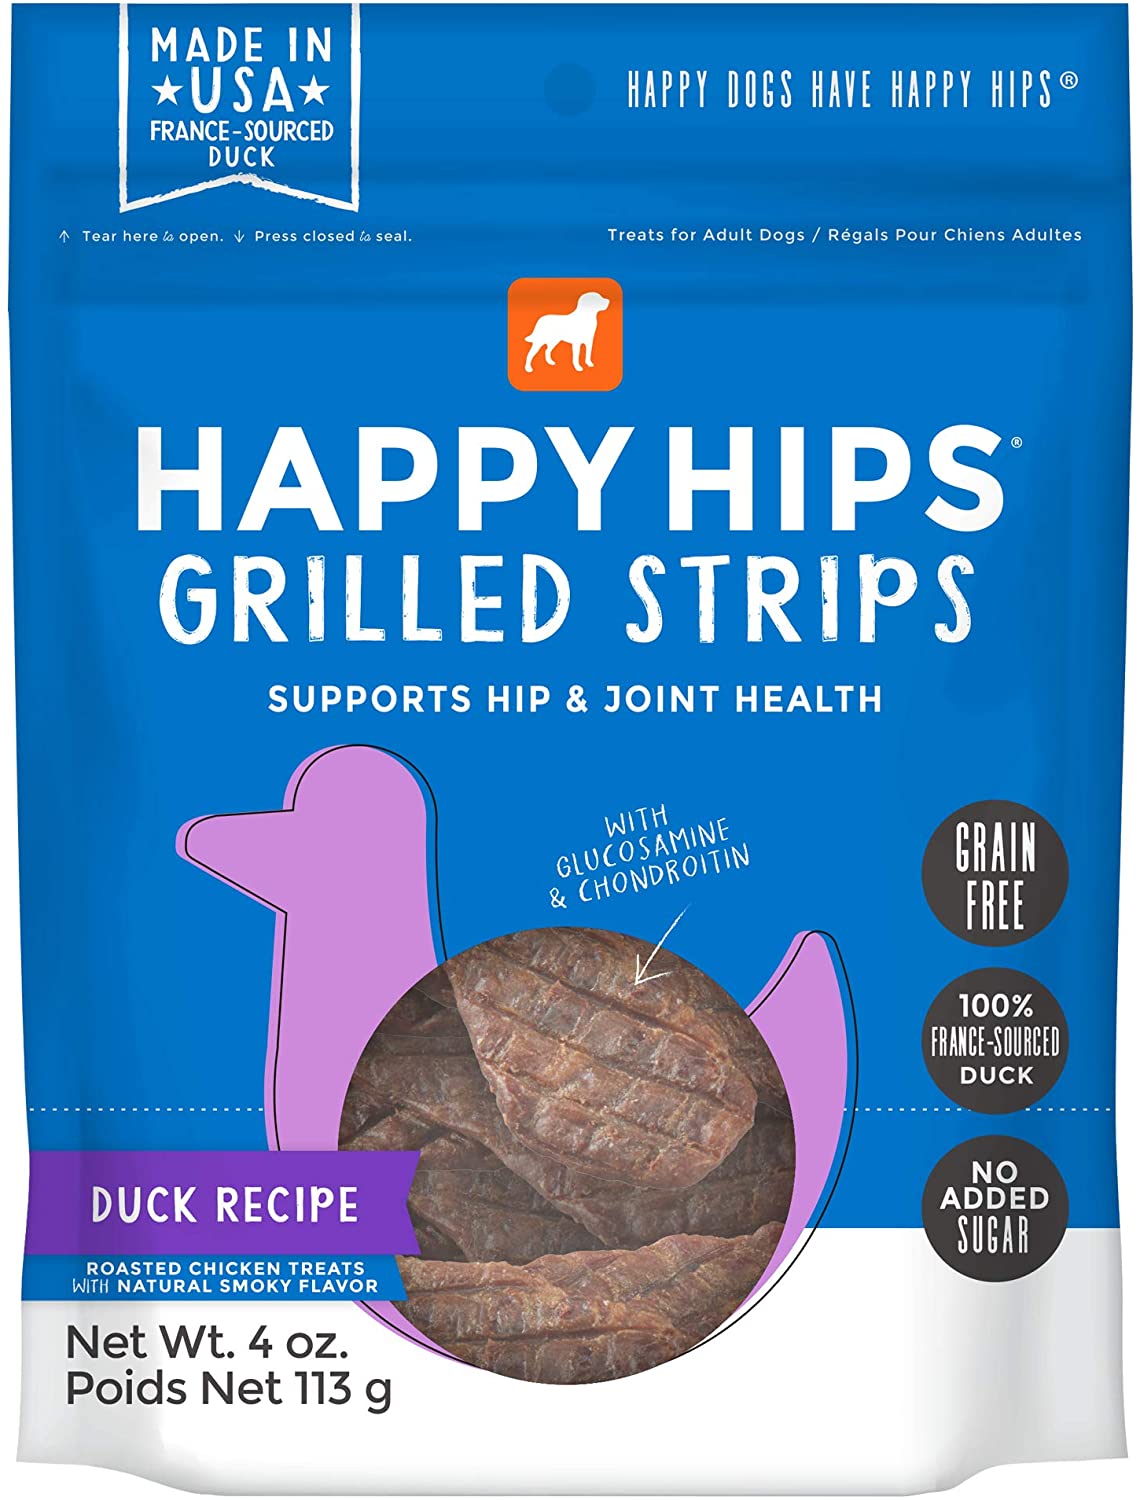 4 oz. Happy Hips Grain Free Grilled Strips Dog Treats (Made in USA w/Glucosamine) $2.99 at Amazon